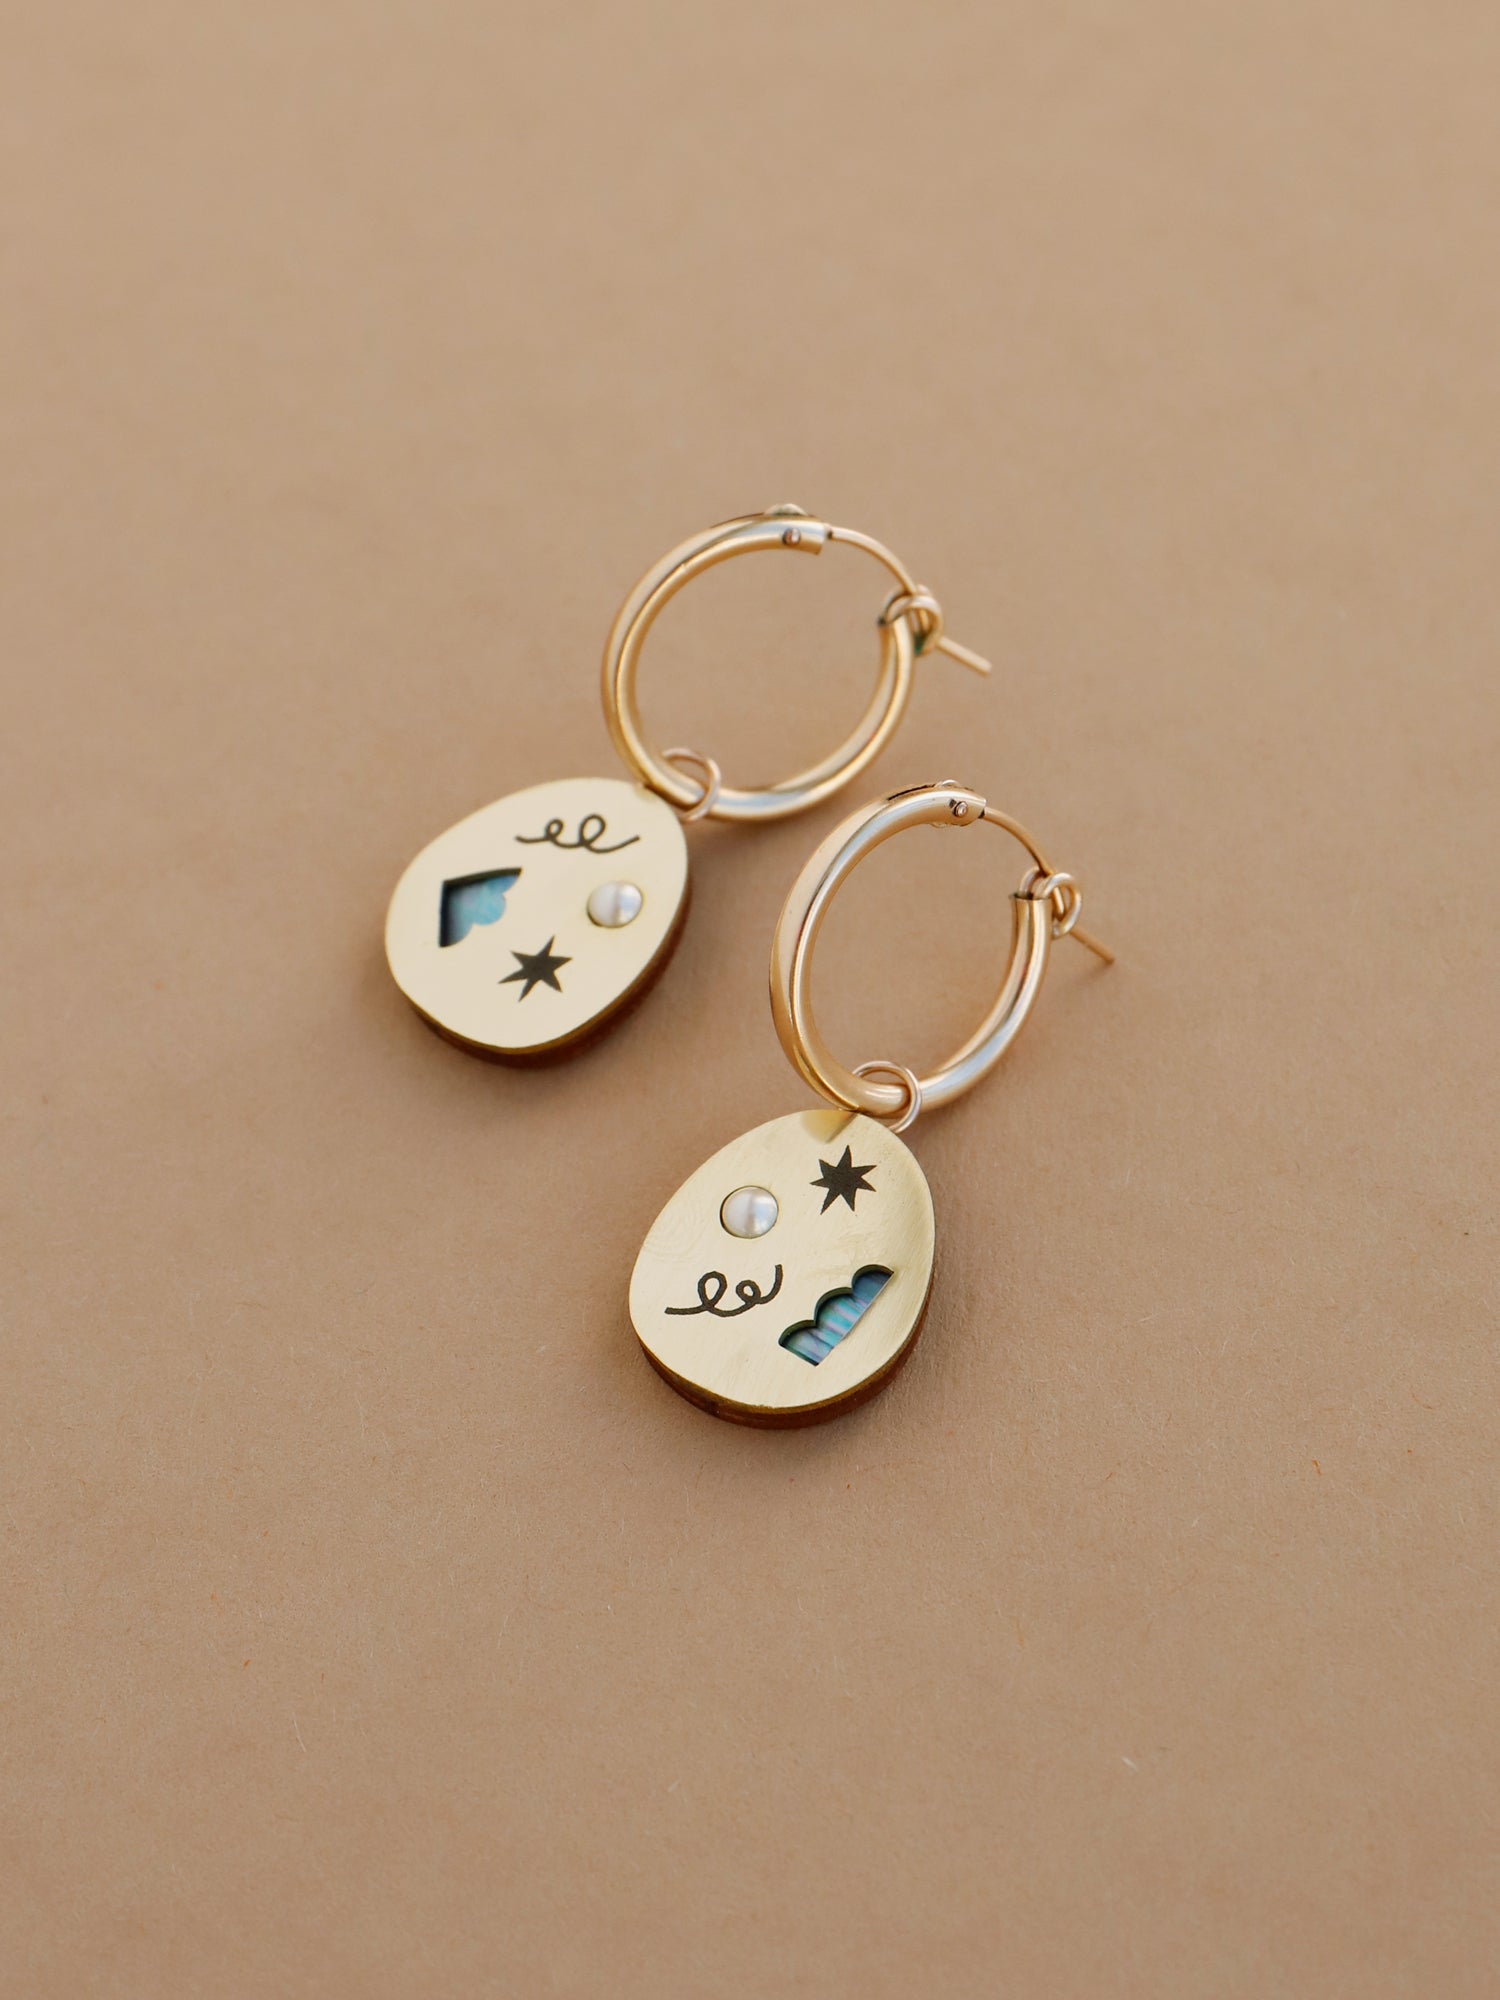 Elegant brass hoop earrings with an illustrative design inspired by celebrations & confetti. Glass pearls and abstract cut outs with inlaid shell in emerald green. Handmade in the UK by Wolf & Moon.